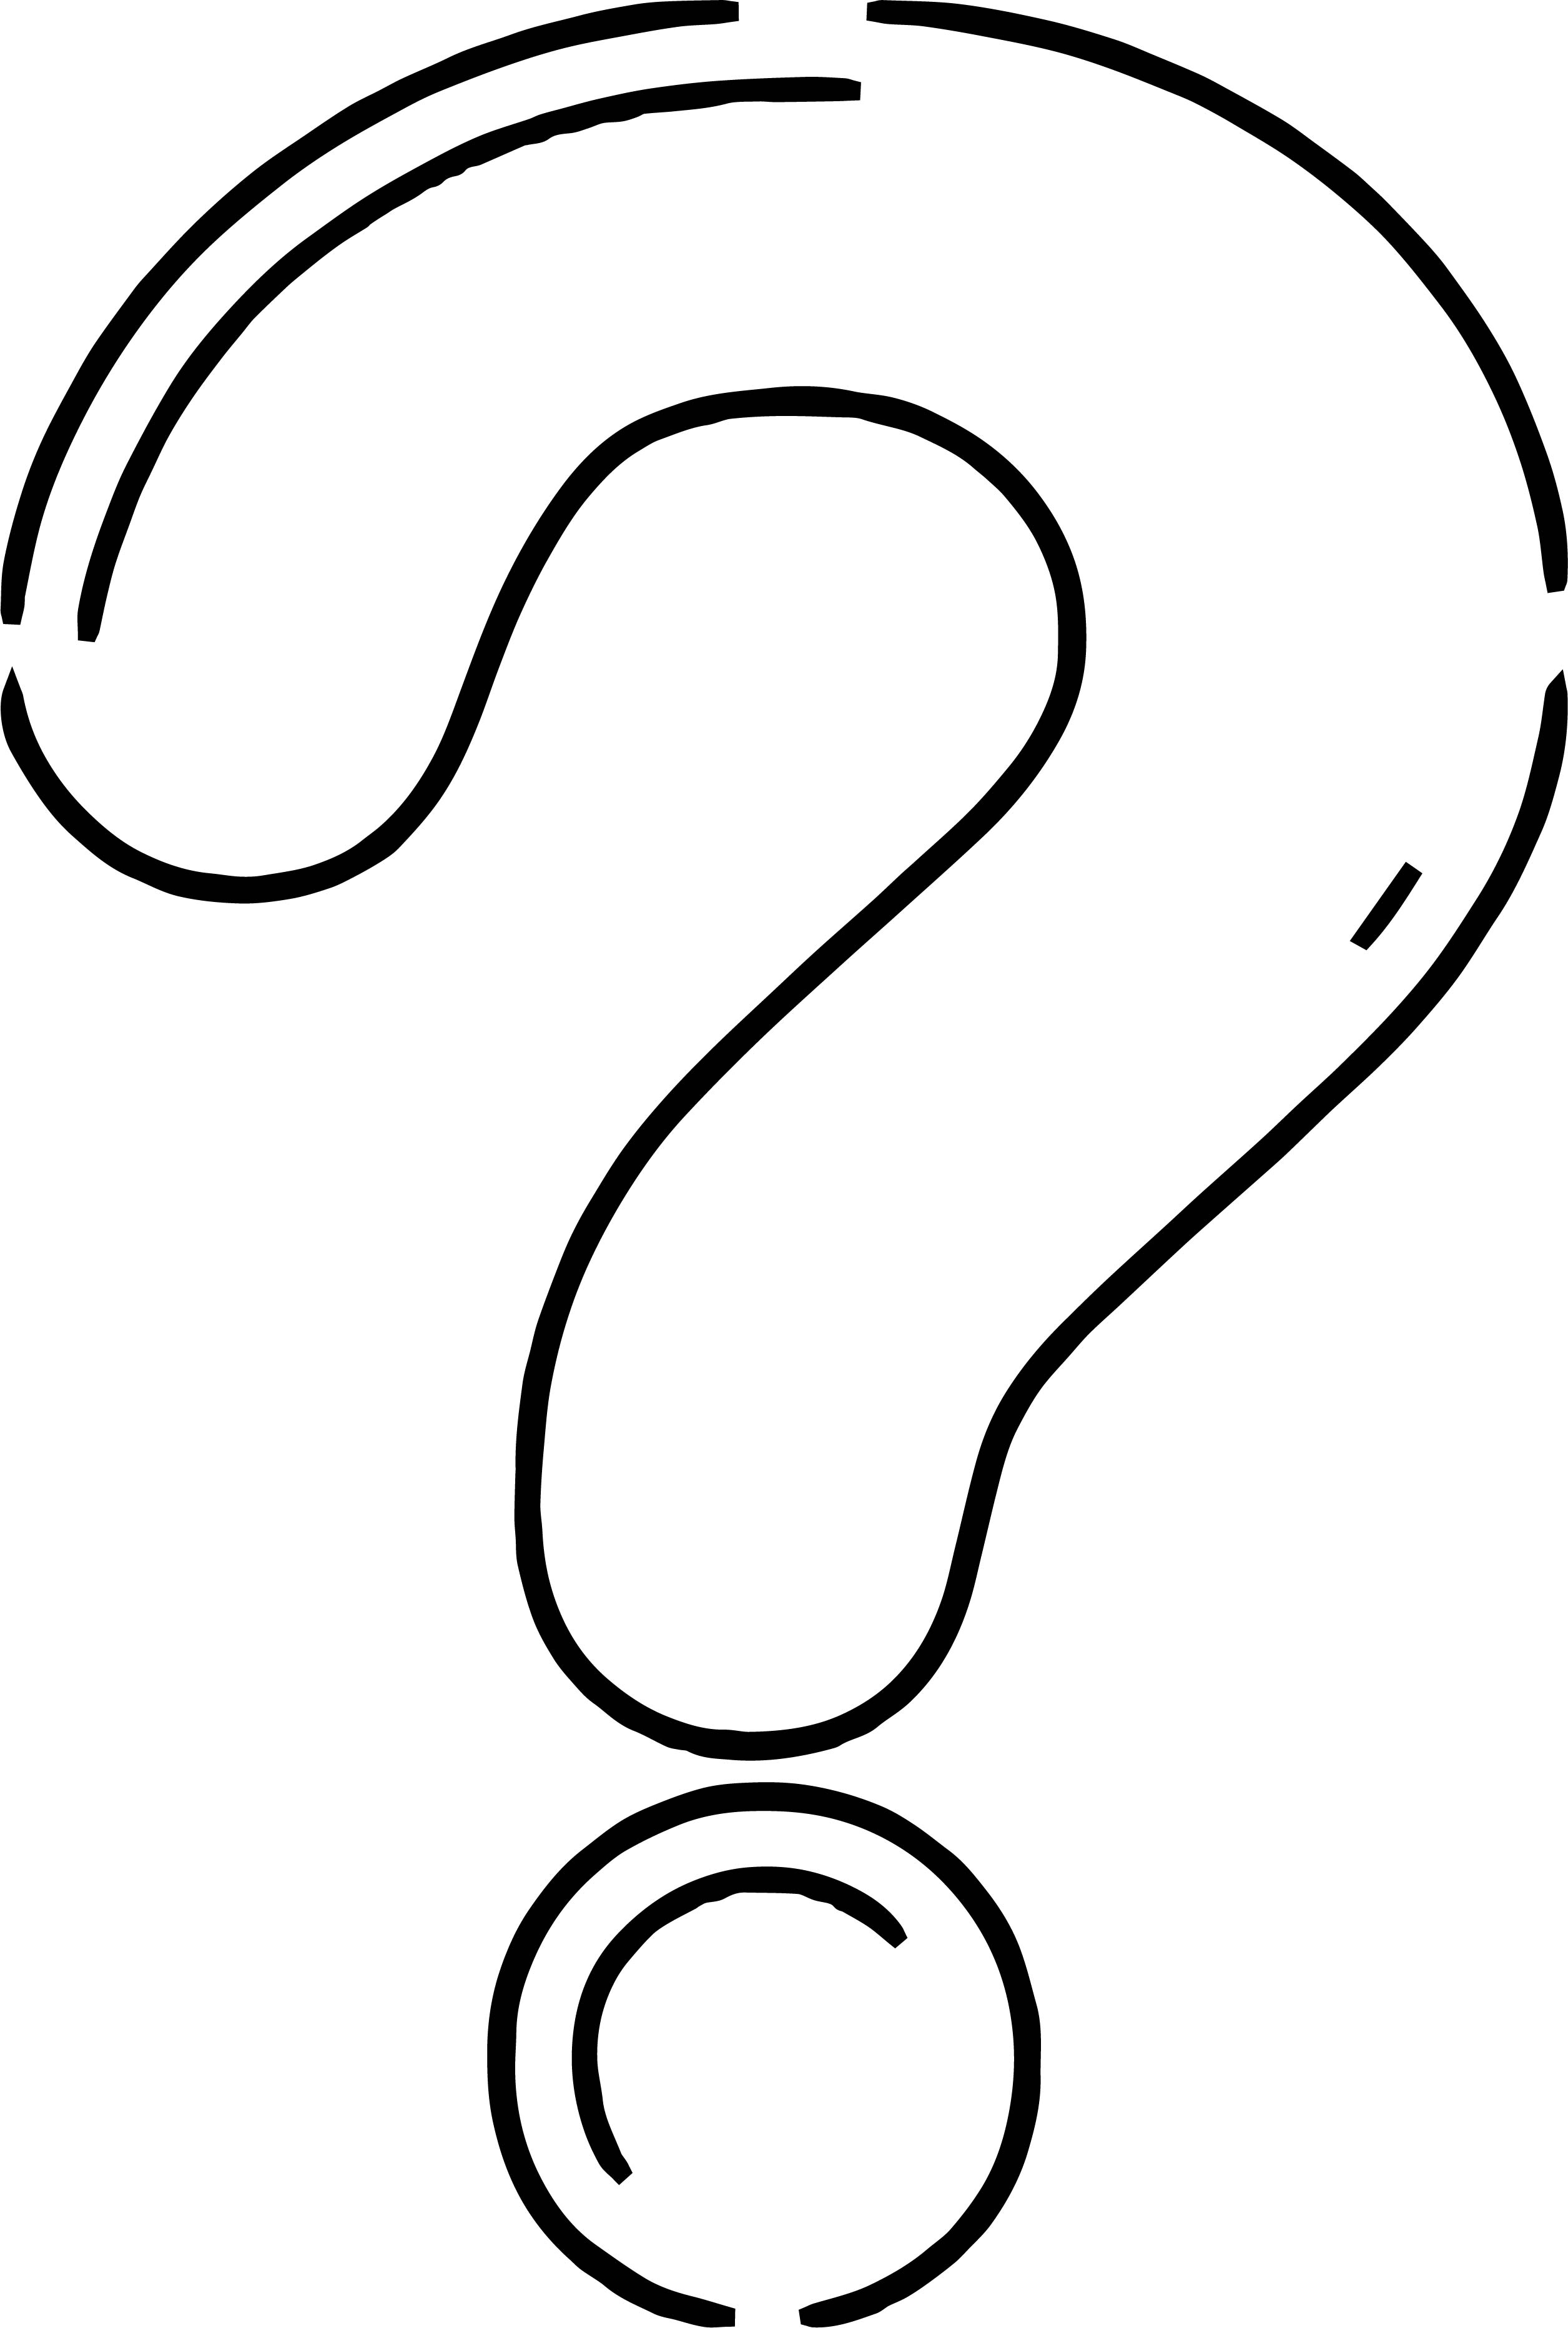 Coloring Page Question Mark Free download on ClipArtMag